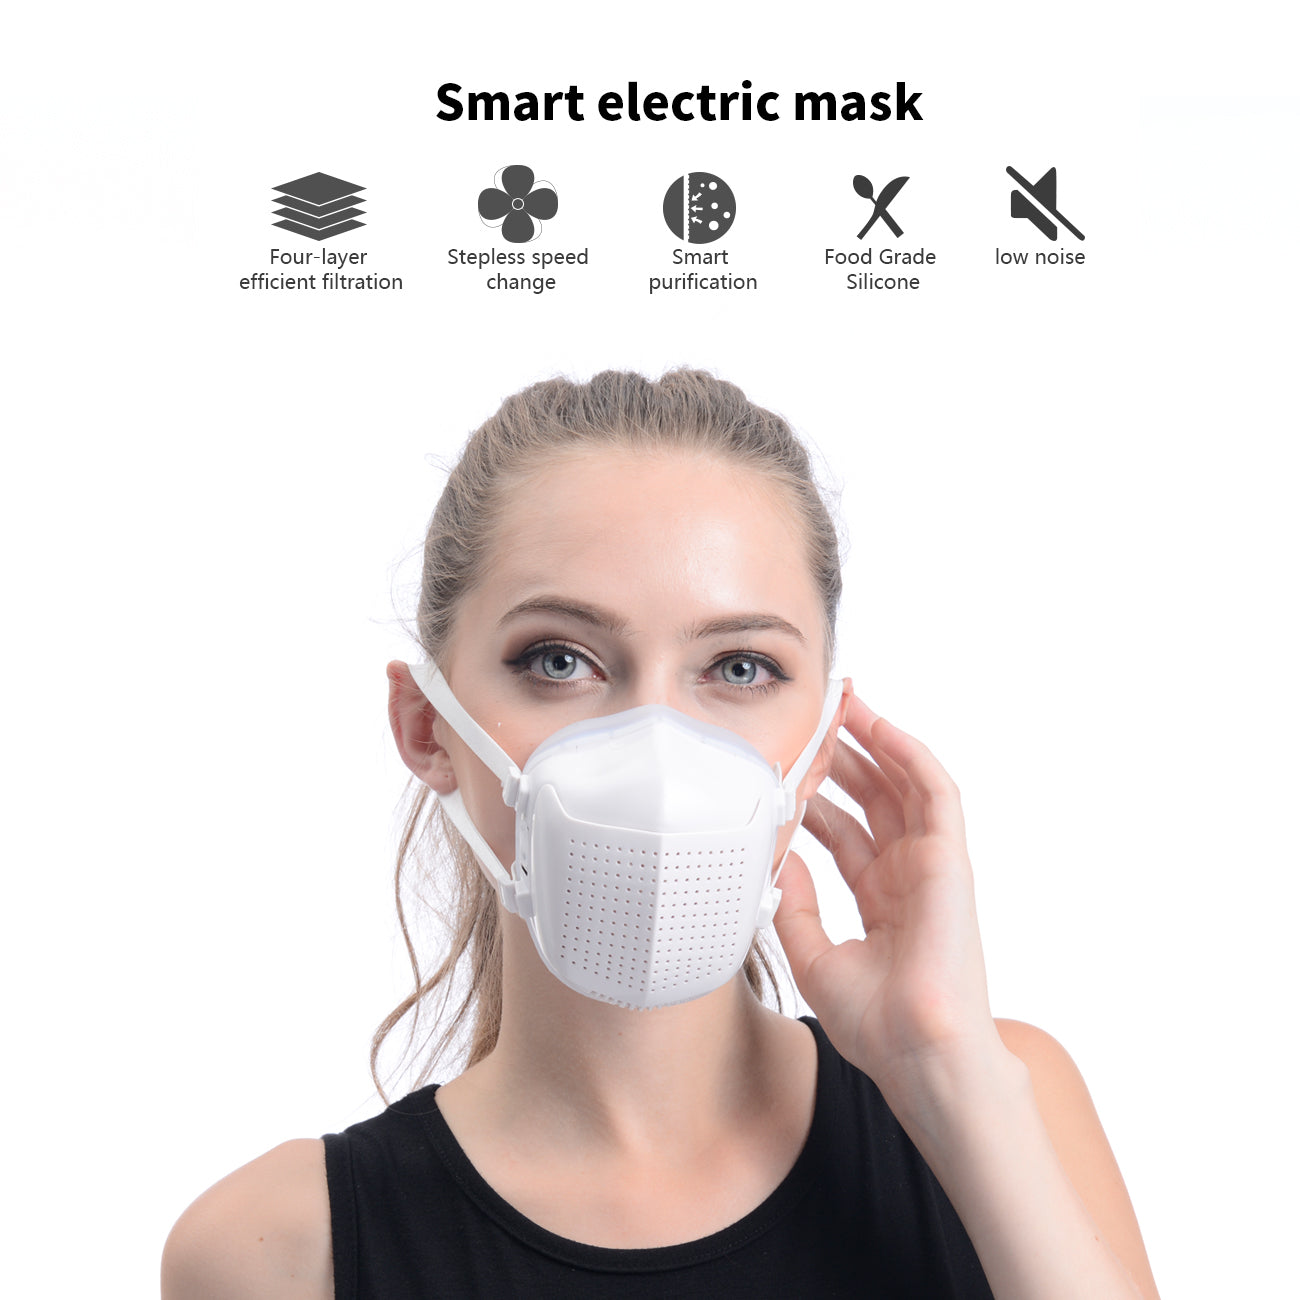 Mask Smart Electric With 4-Layer Efficient Filtration